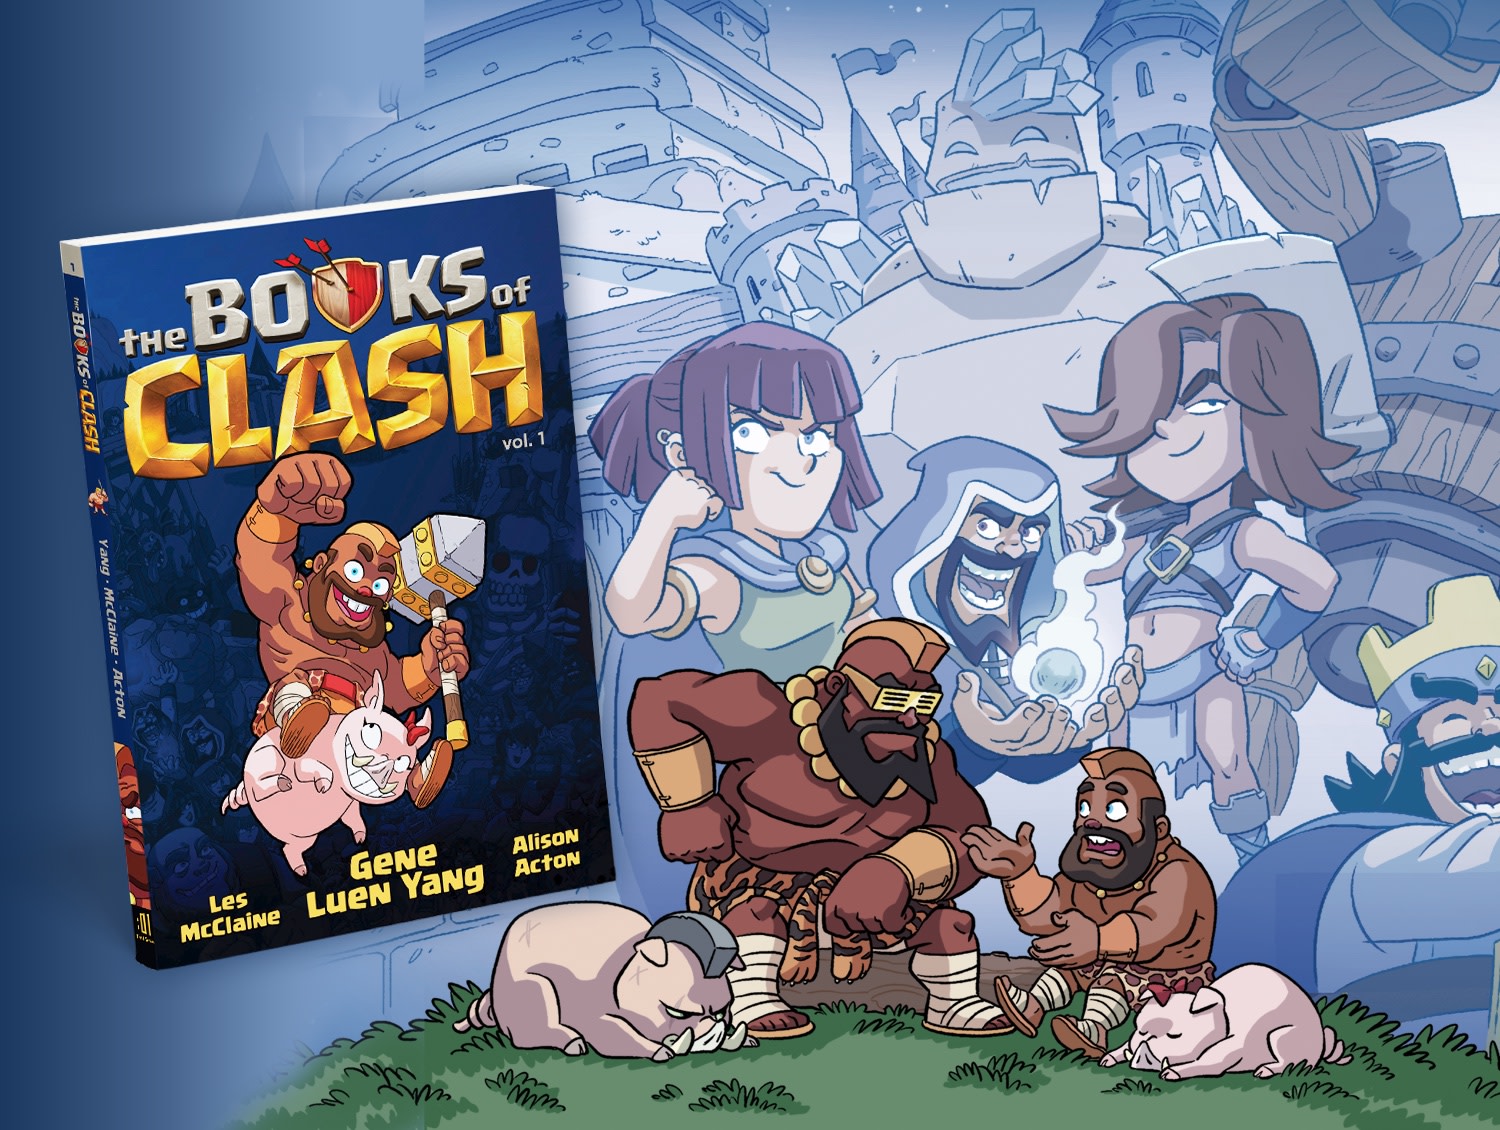 Introducing the Books of Clash!